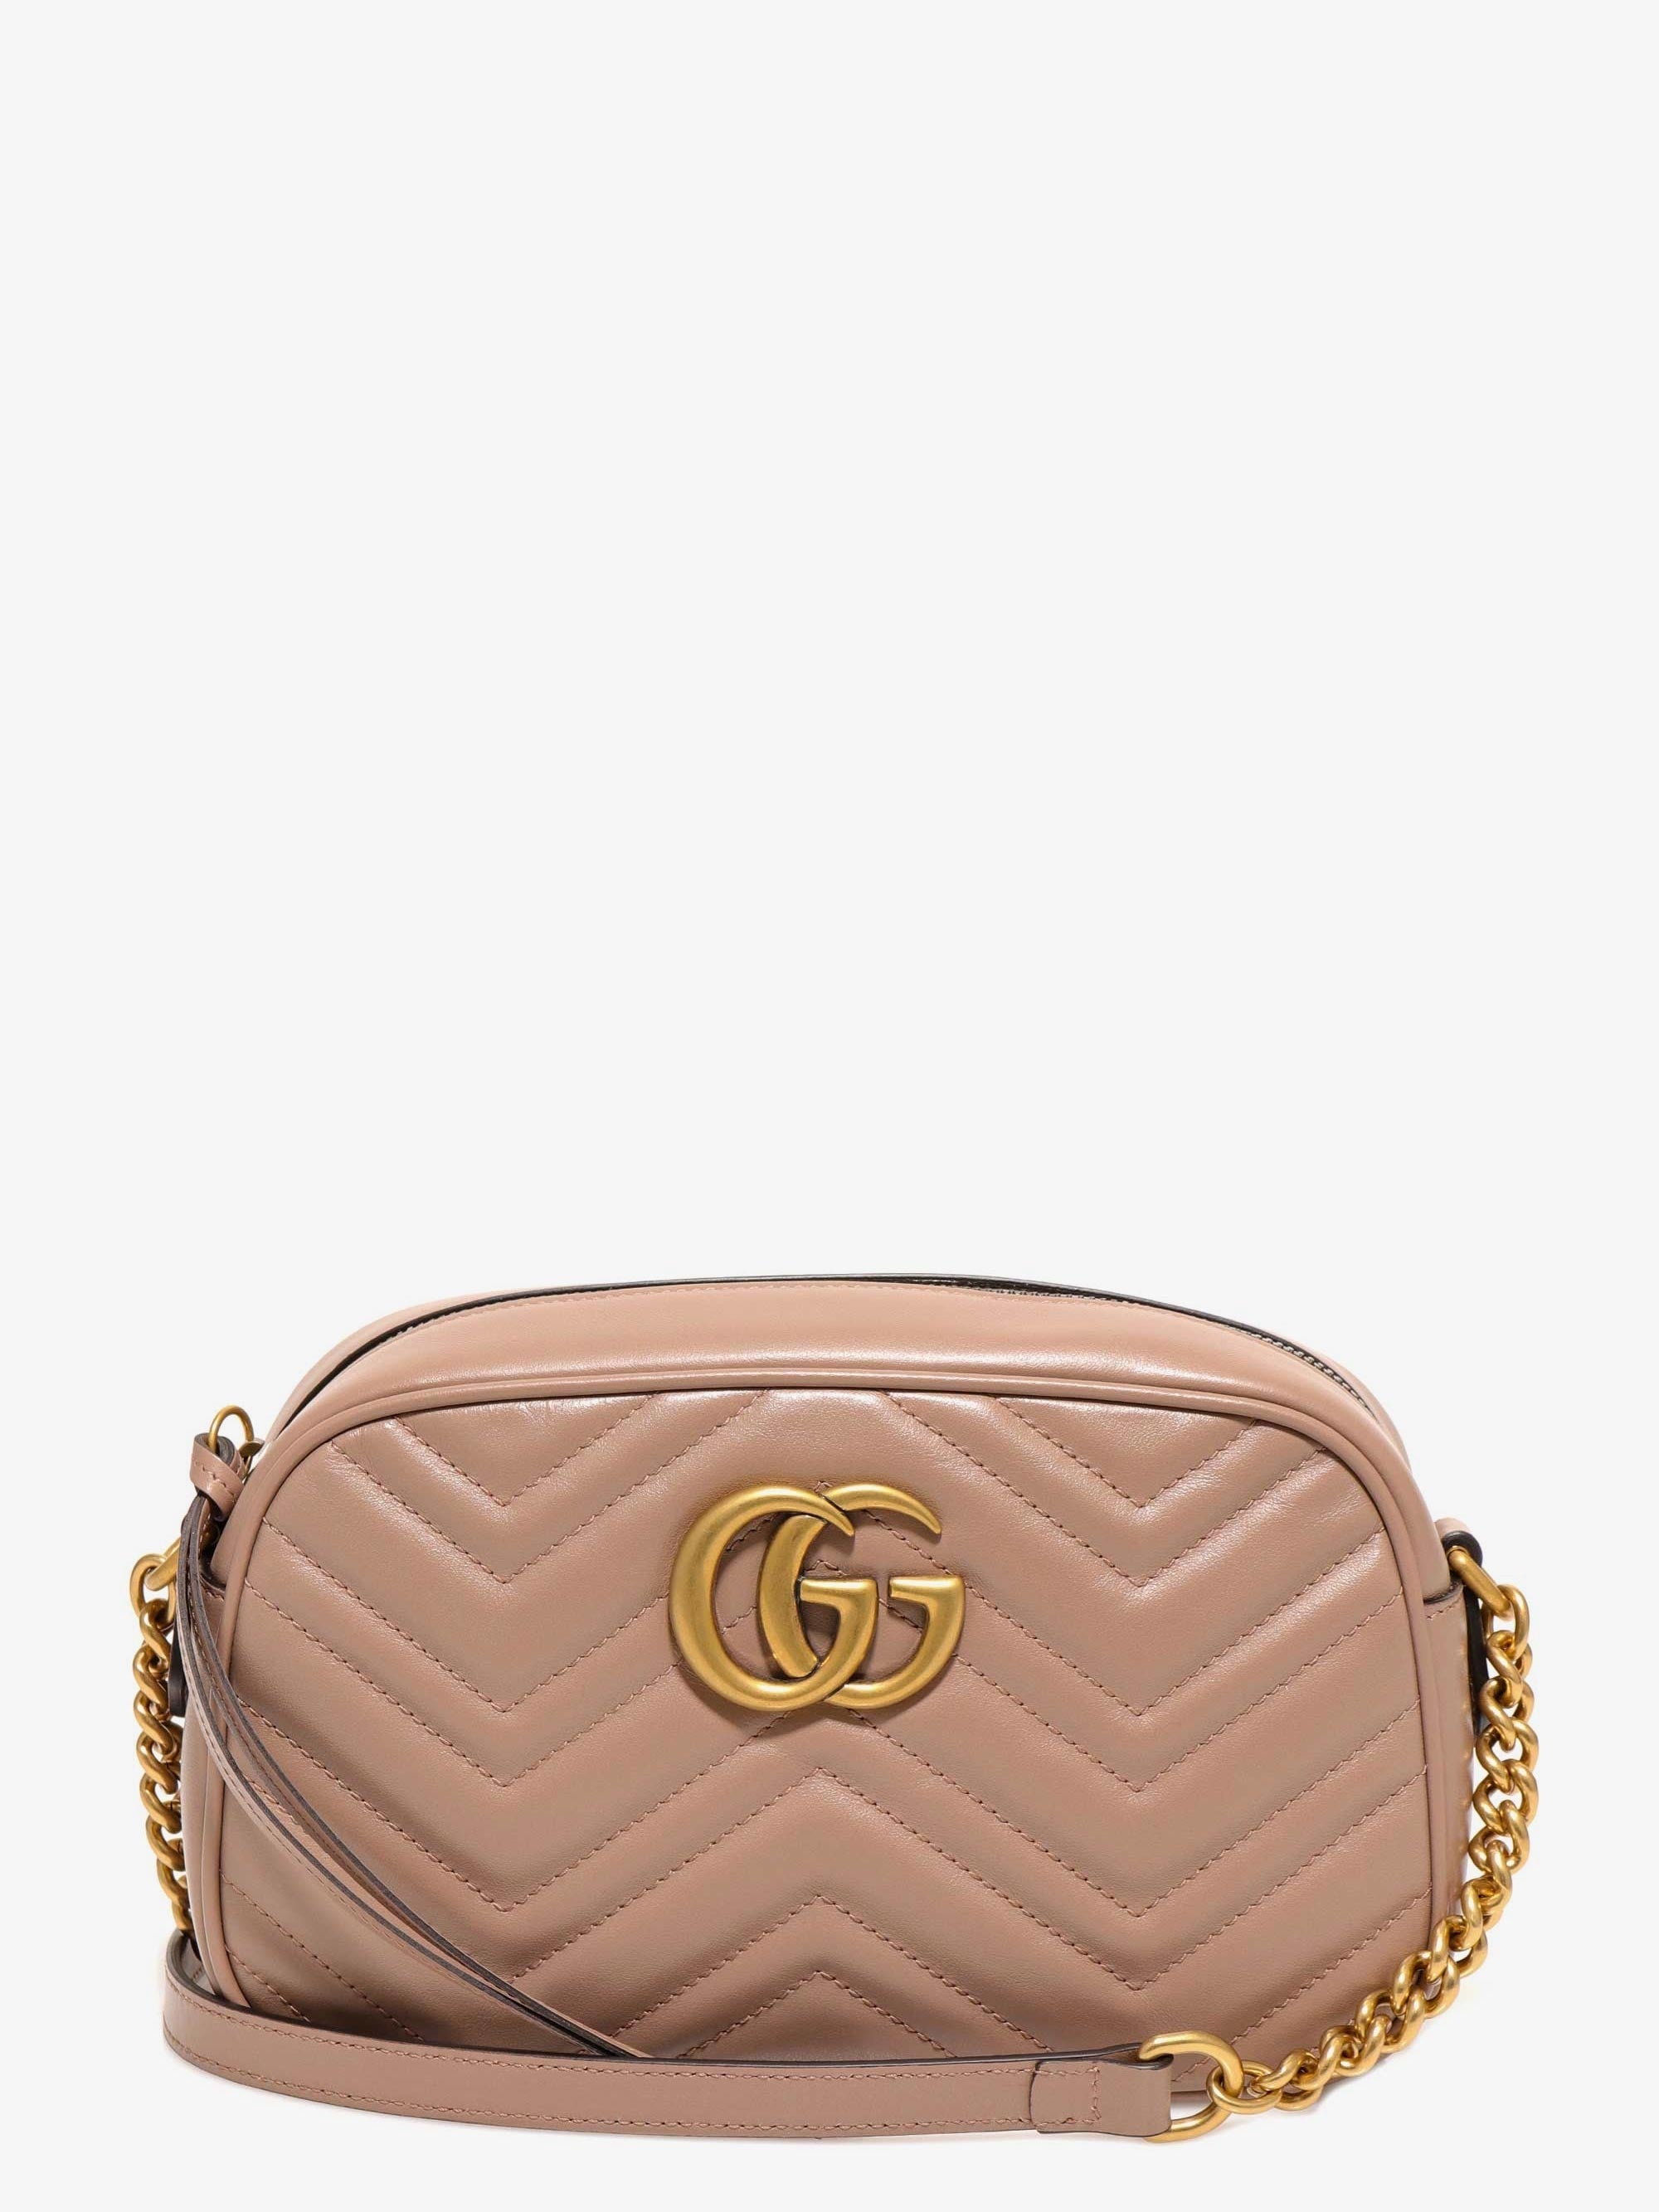 Gucci Woman Gg Marmont Woman Pink Shoulder Bags - 1